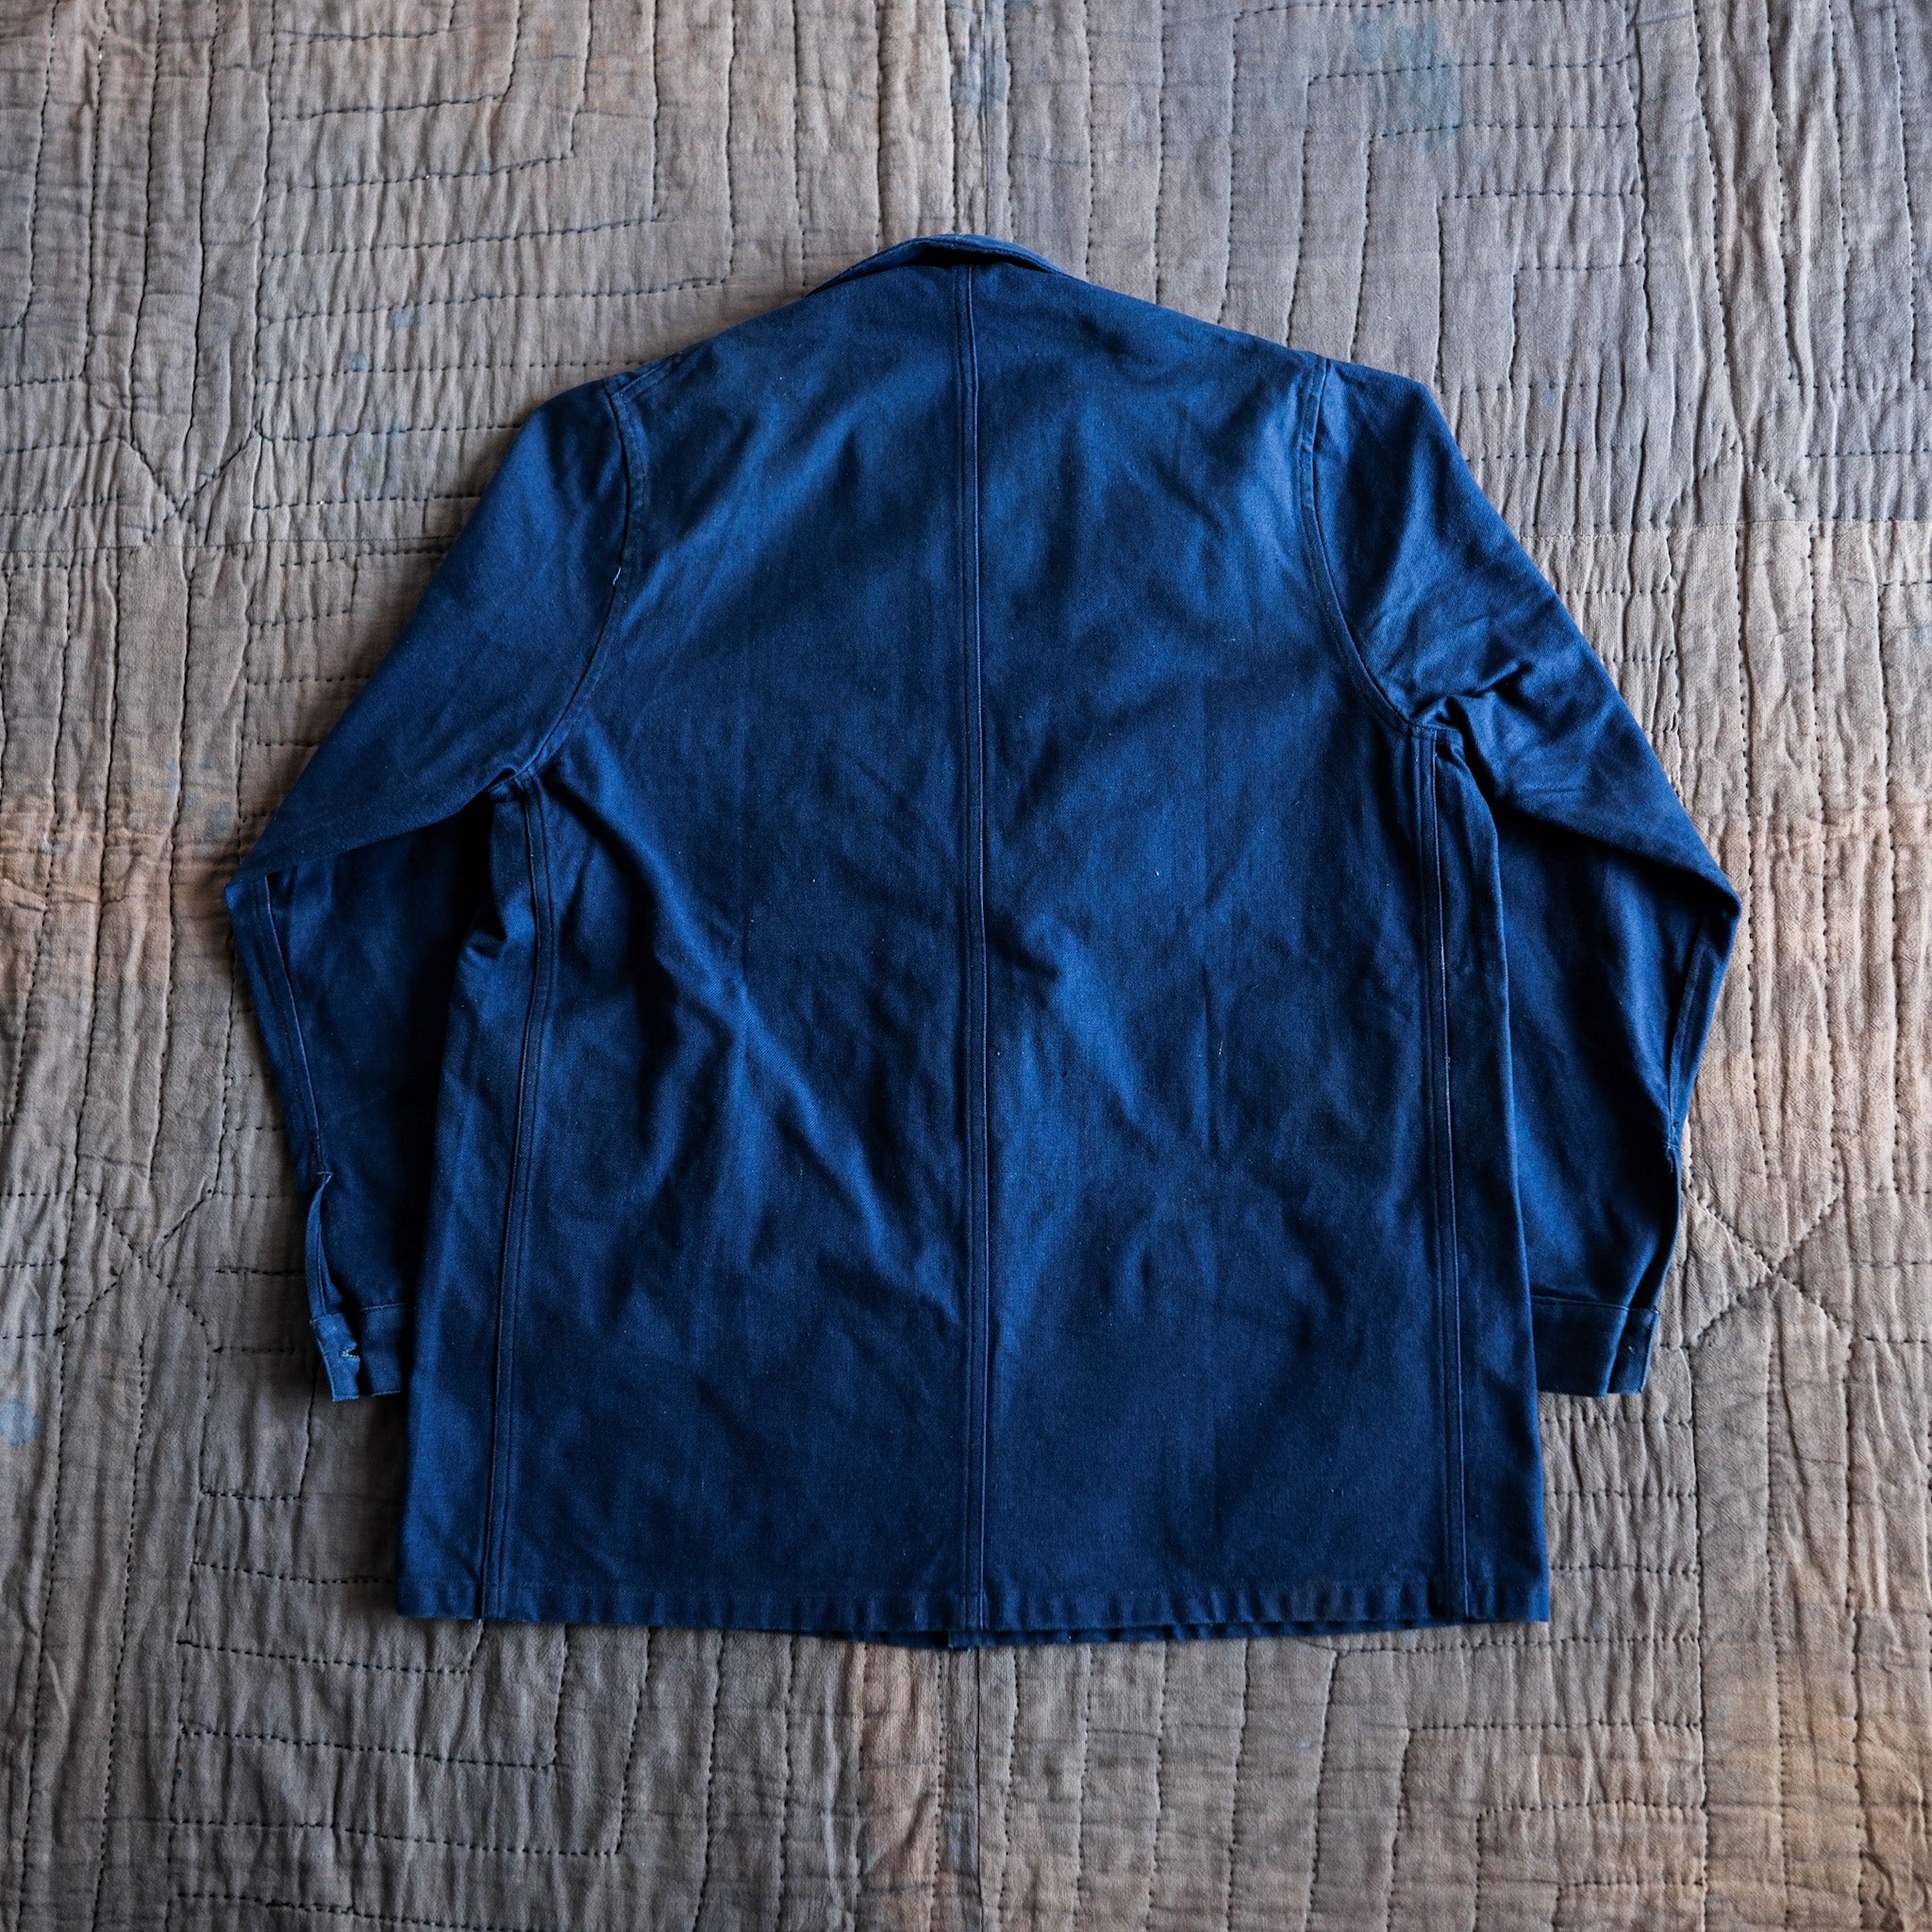 [~ 50's] French Army Blue Cotton Linen Twil Work Jacket